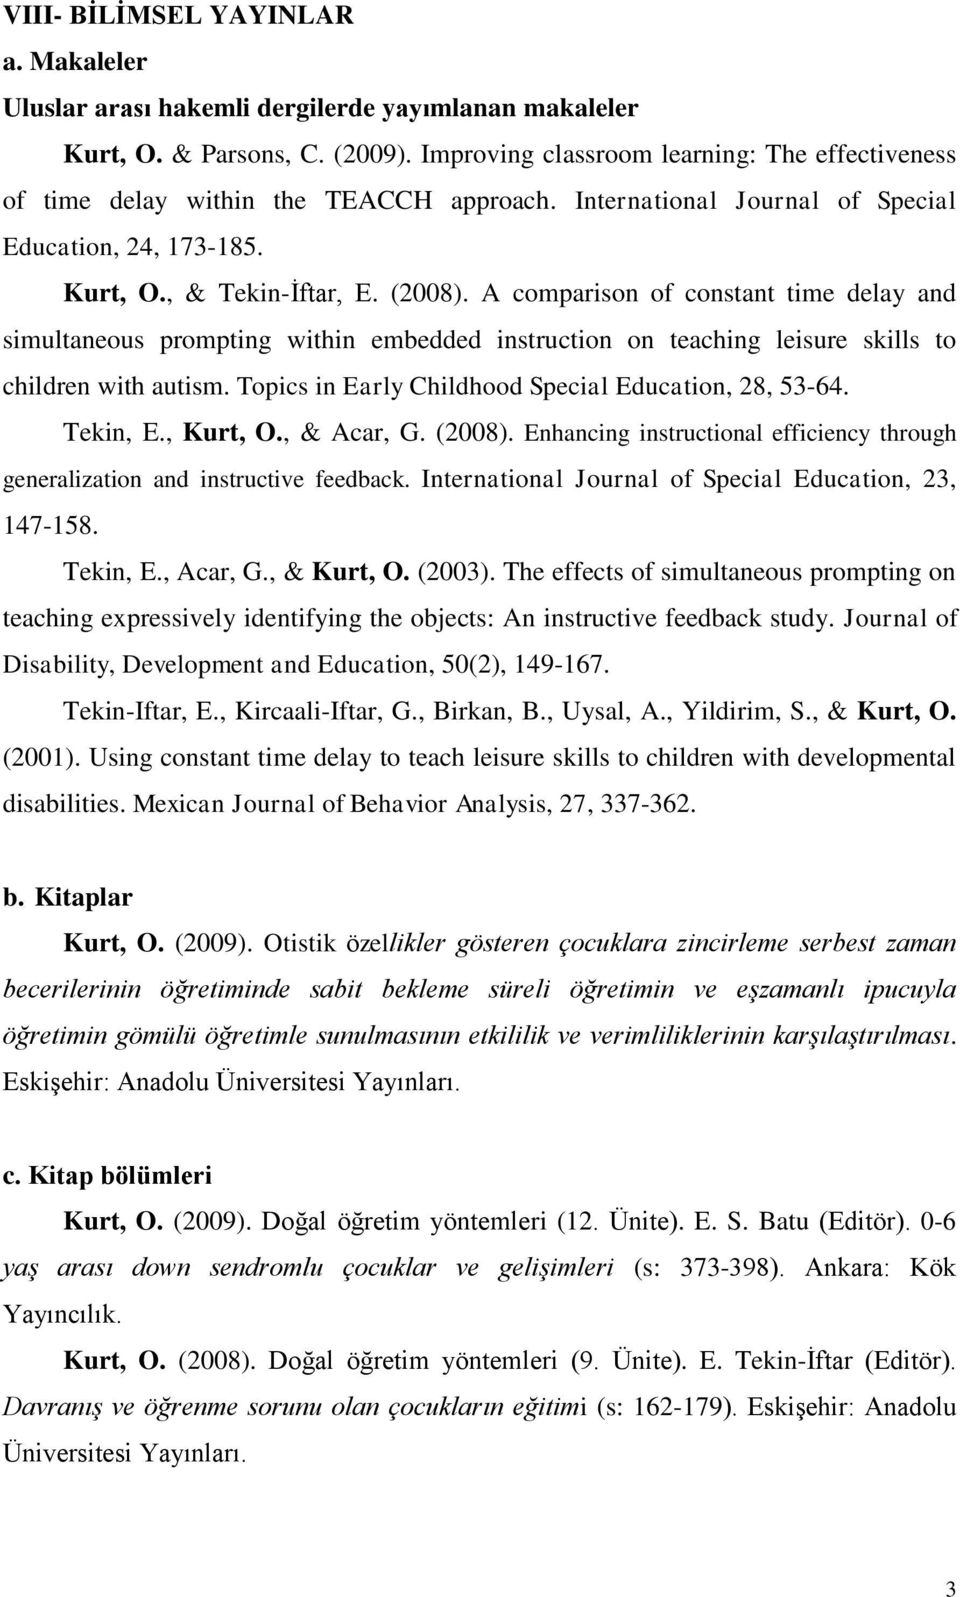 A comparison of constant time delay and simultaneous prompting within embedded instruction on teaching leisure skills to children with autism. Topics in Early Childhood Special Education, 28, 53-64.